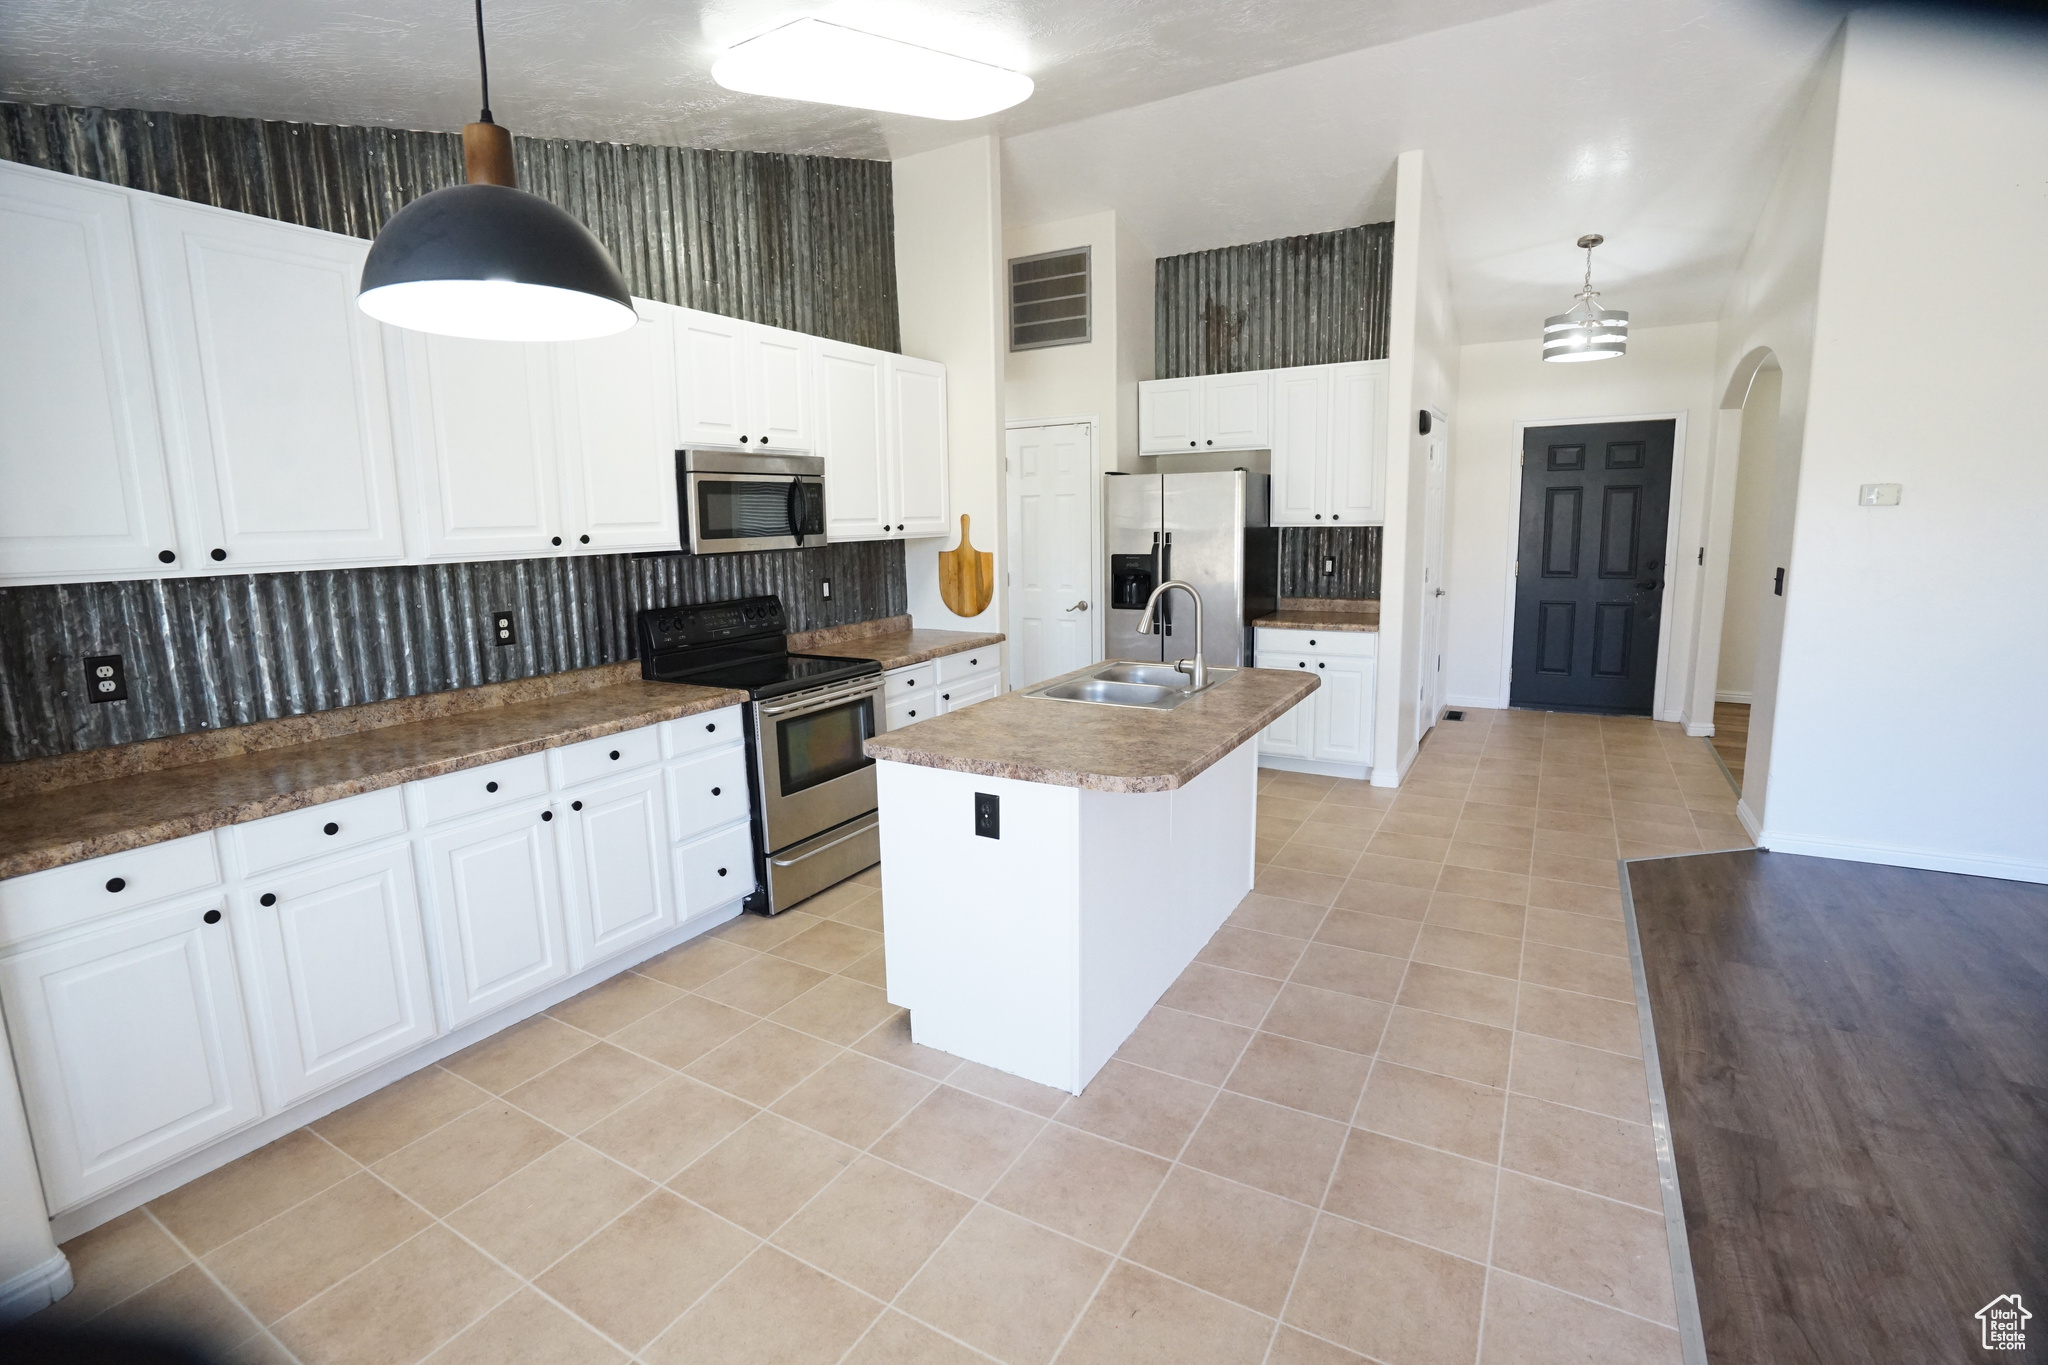 Kitchen featuring decorative light fixtures, an island with sink, white cabinets, and stainless steel appliances